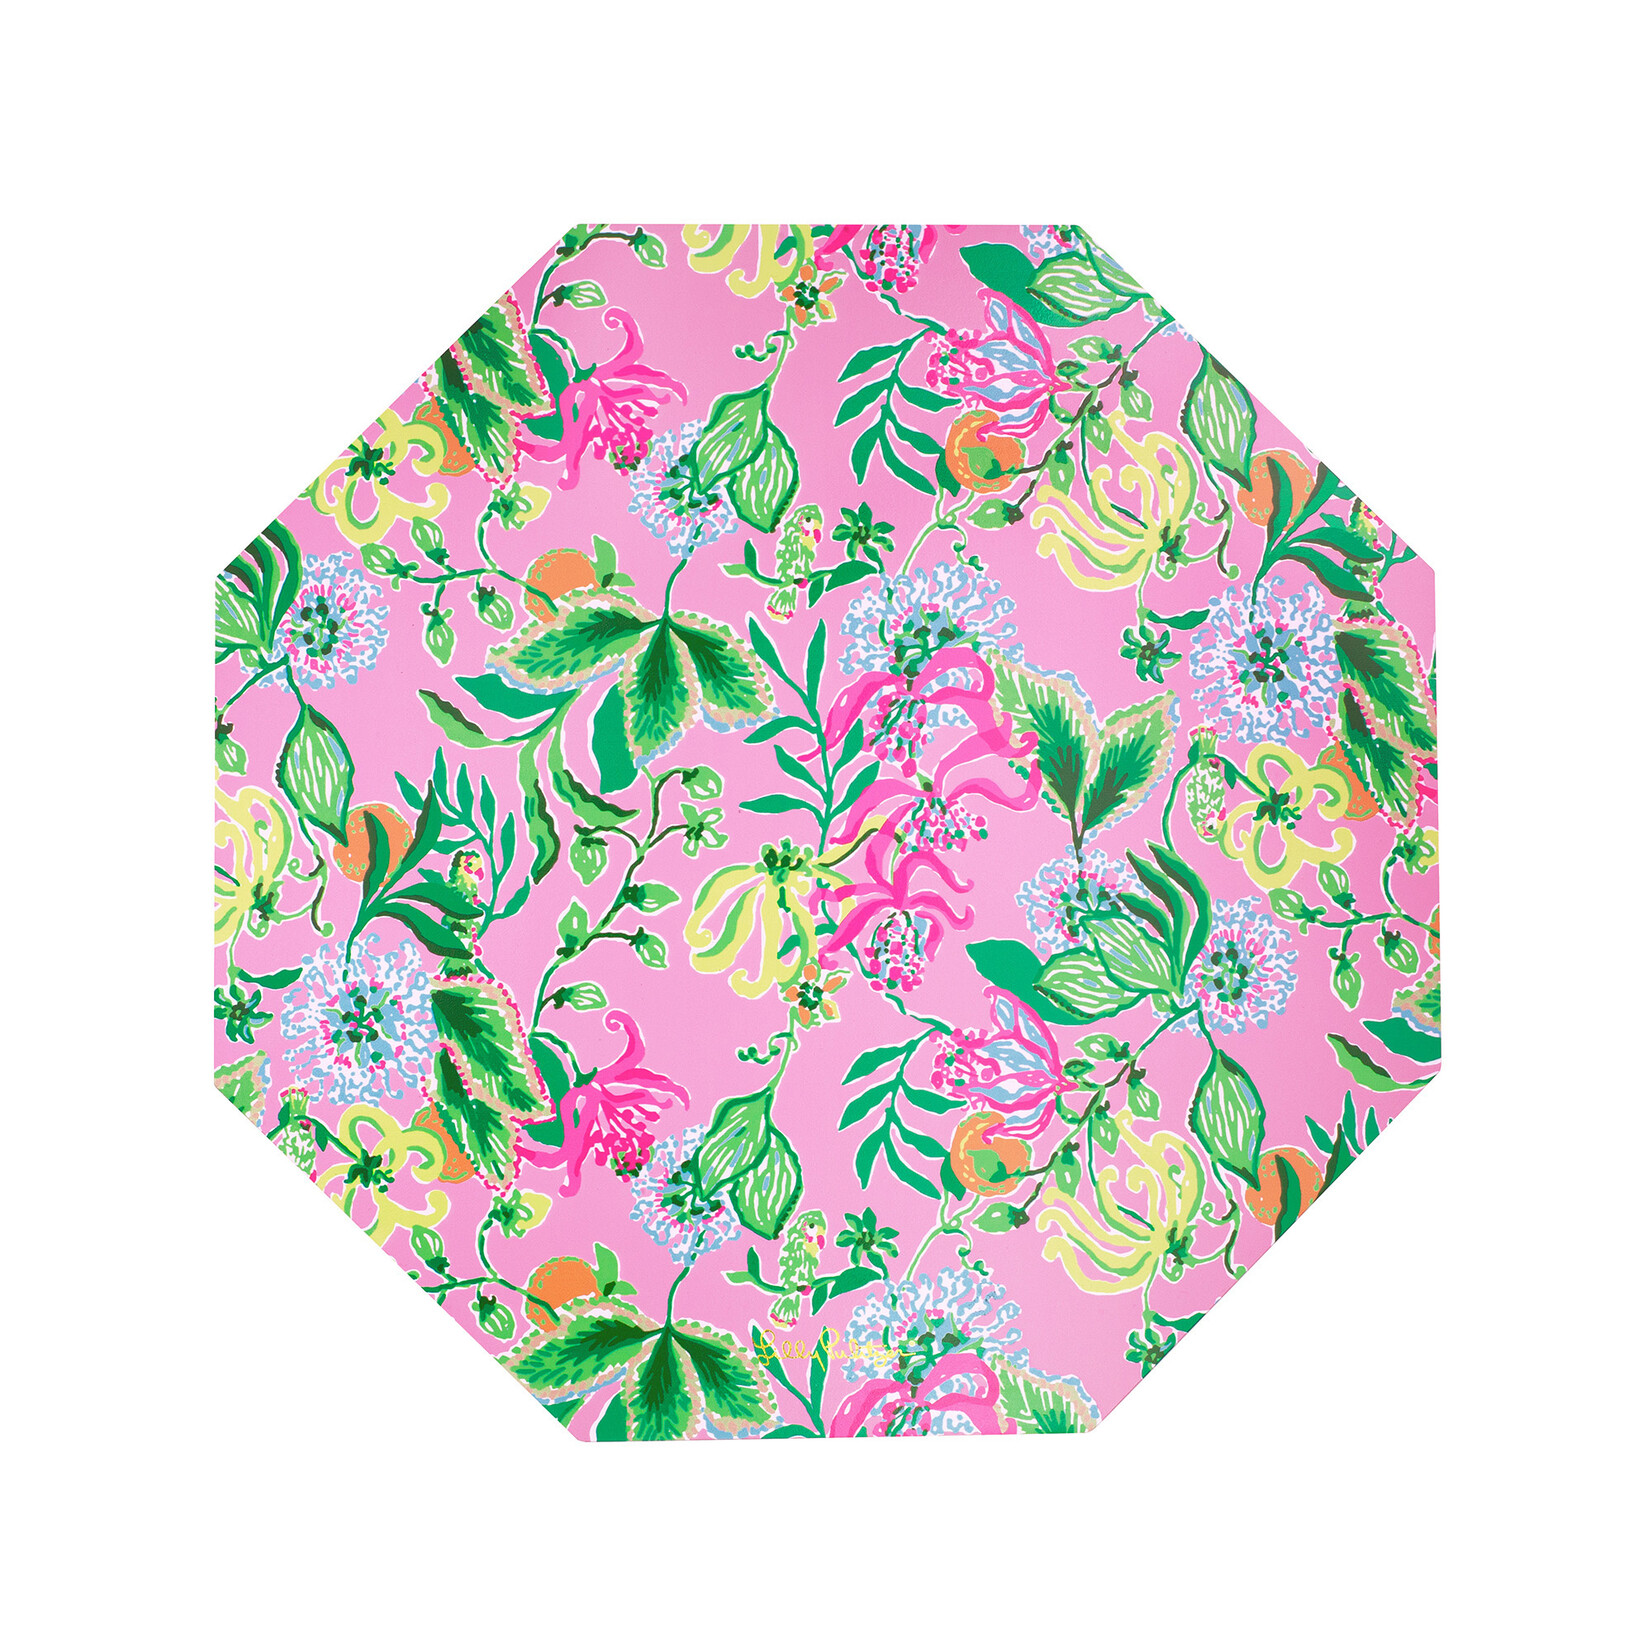 Lilly Pulitzer LILLY PULITZER REVERSIBLE PLACEMATS, HARD PLACEMATS, SET OF 4,  AMORE/CONCH SHELL PINK CANING